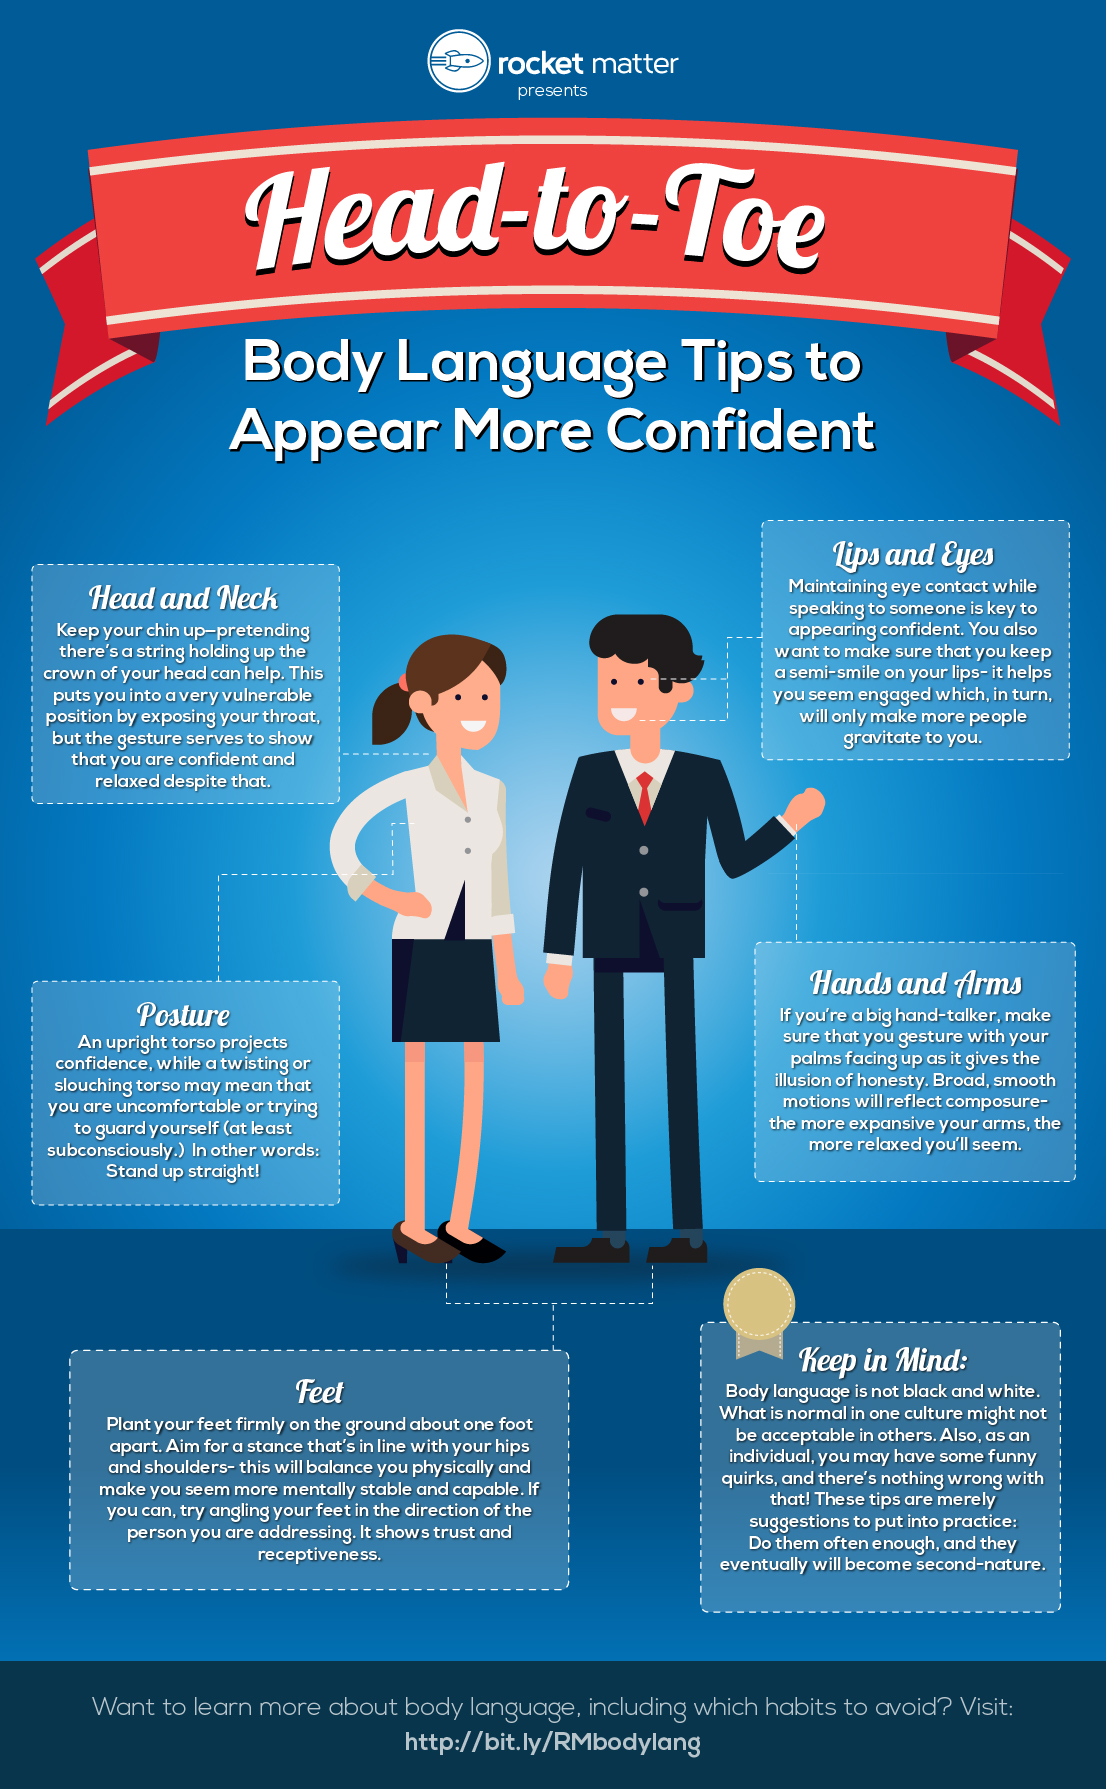 Head-to-Toe Body Language Tips to Appear More Confident (Infographic)